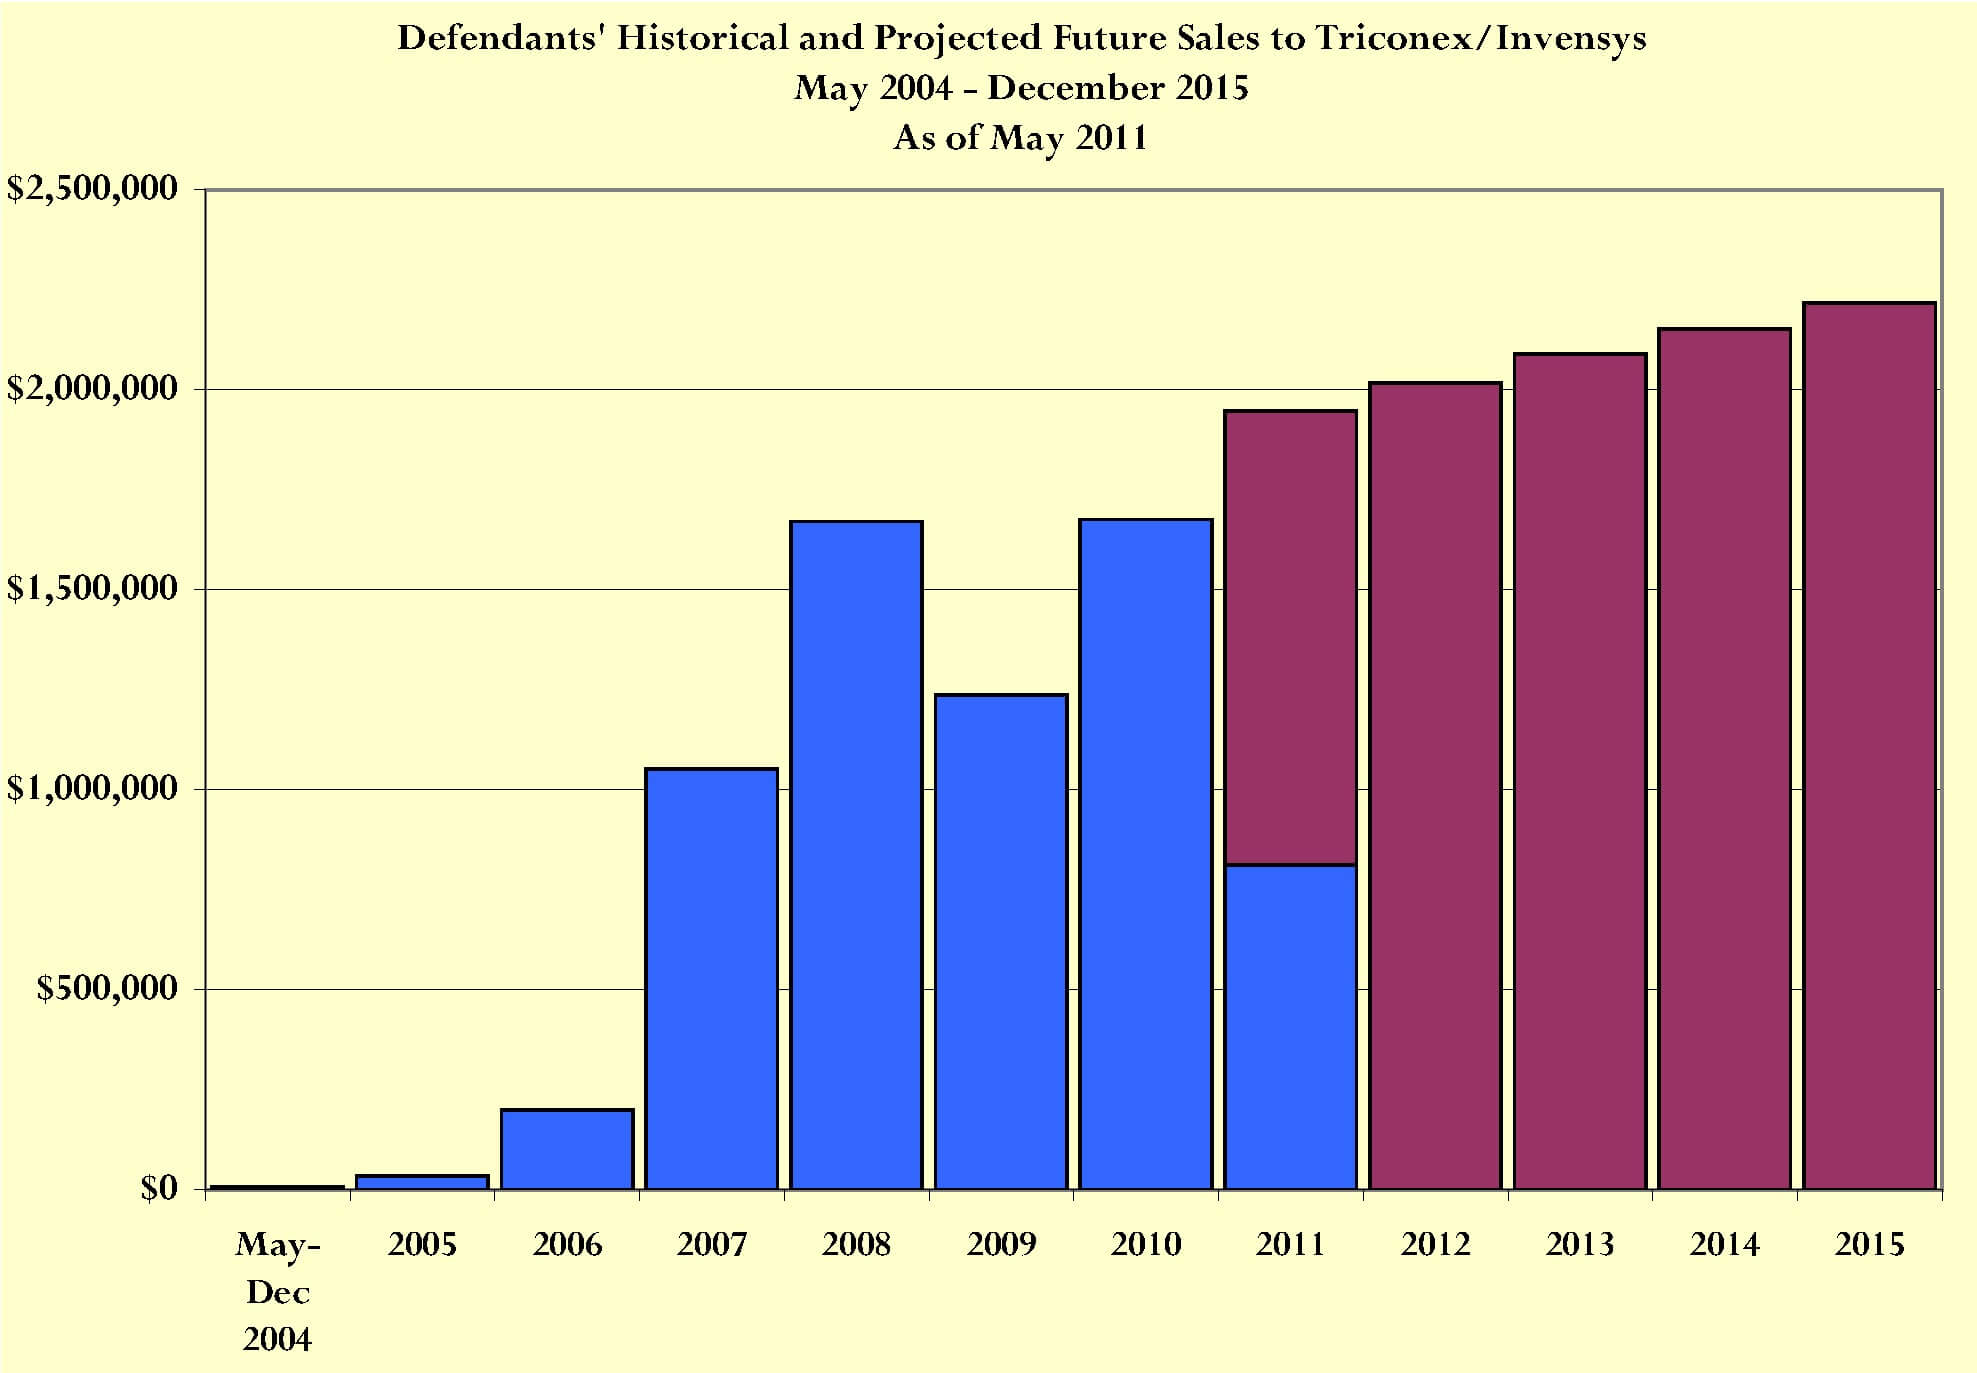 Defendants Historical and Projected Future Sales to Triconex Invensys Chart